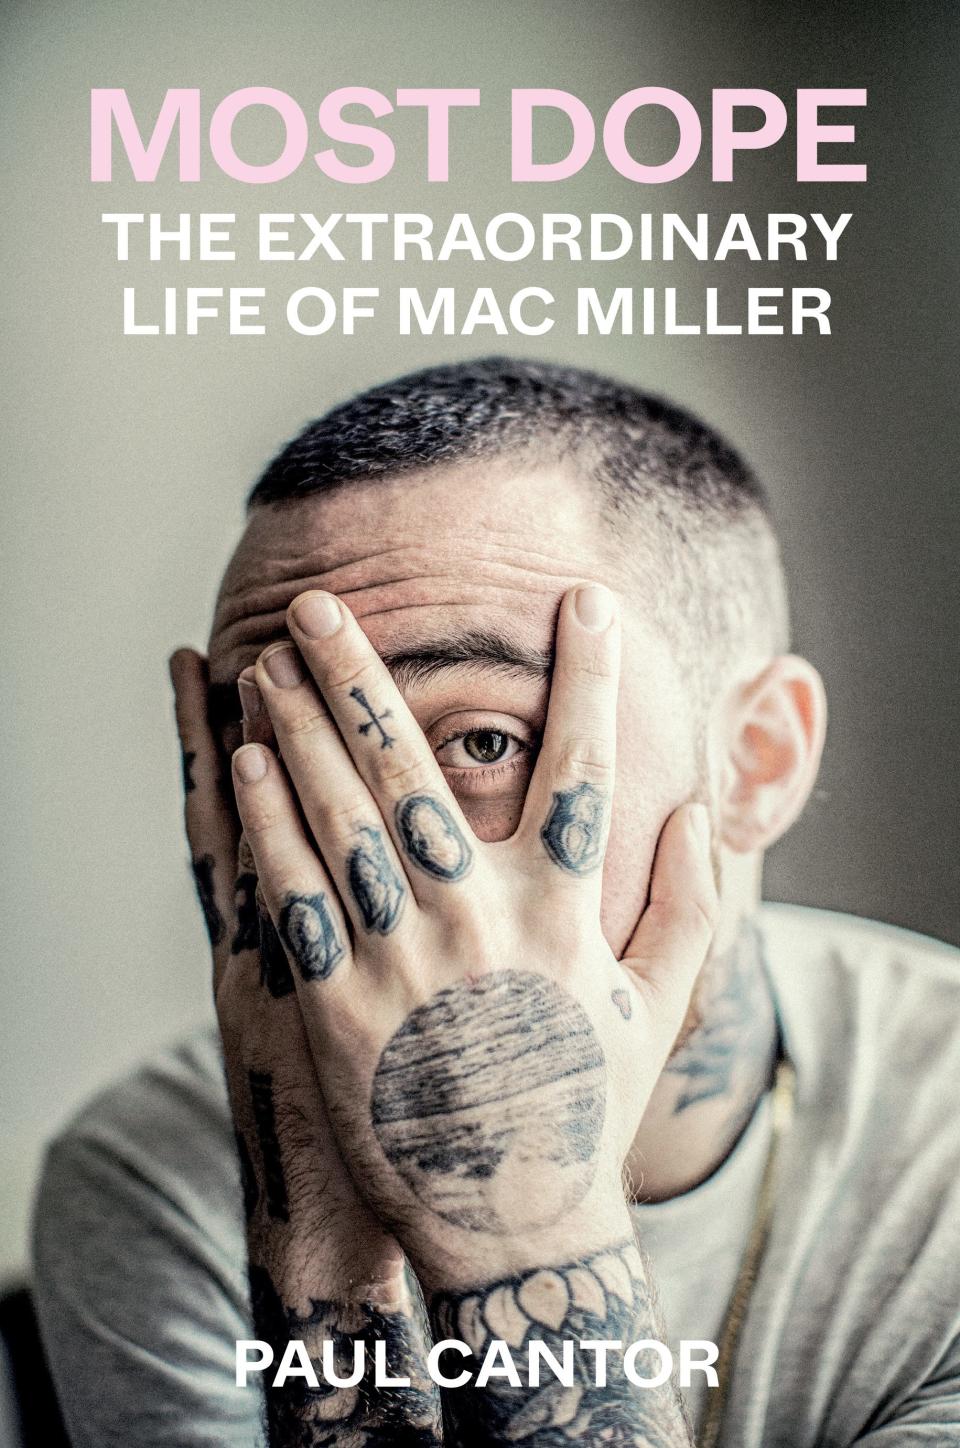 Rapper Mac Miller's unique rise to fame before his untimely death in 2018 is chronicled in "Most Dope: The Extraordinary Life of Mac Miller," by Paul Cantor.